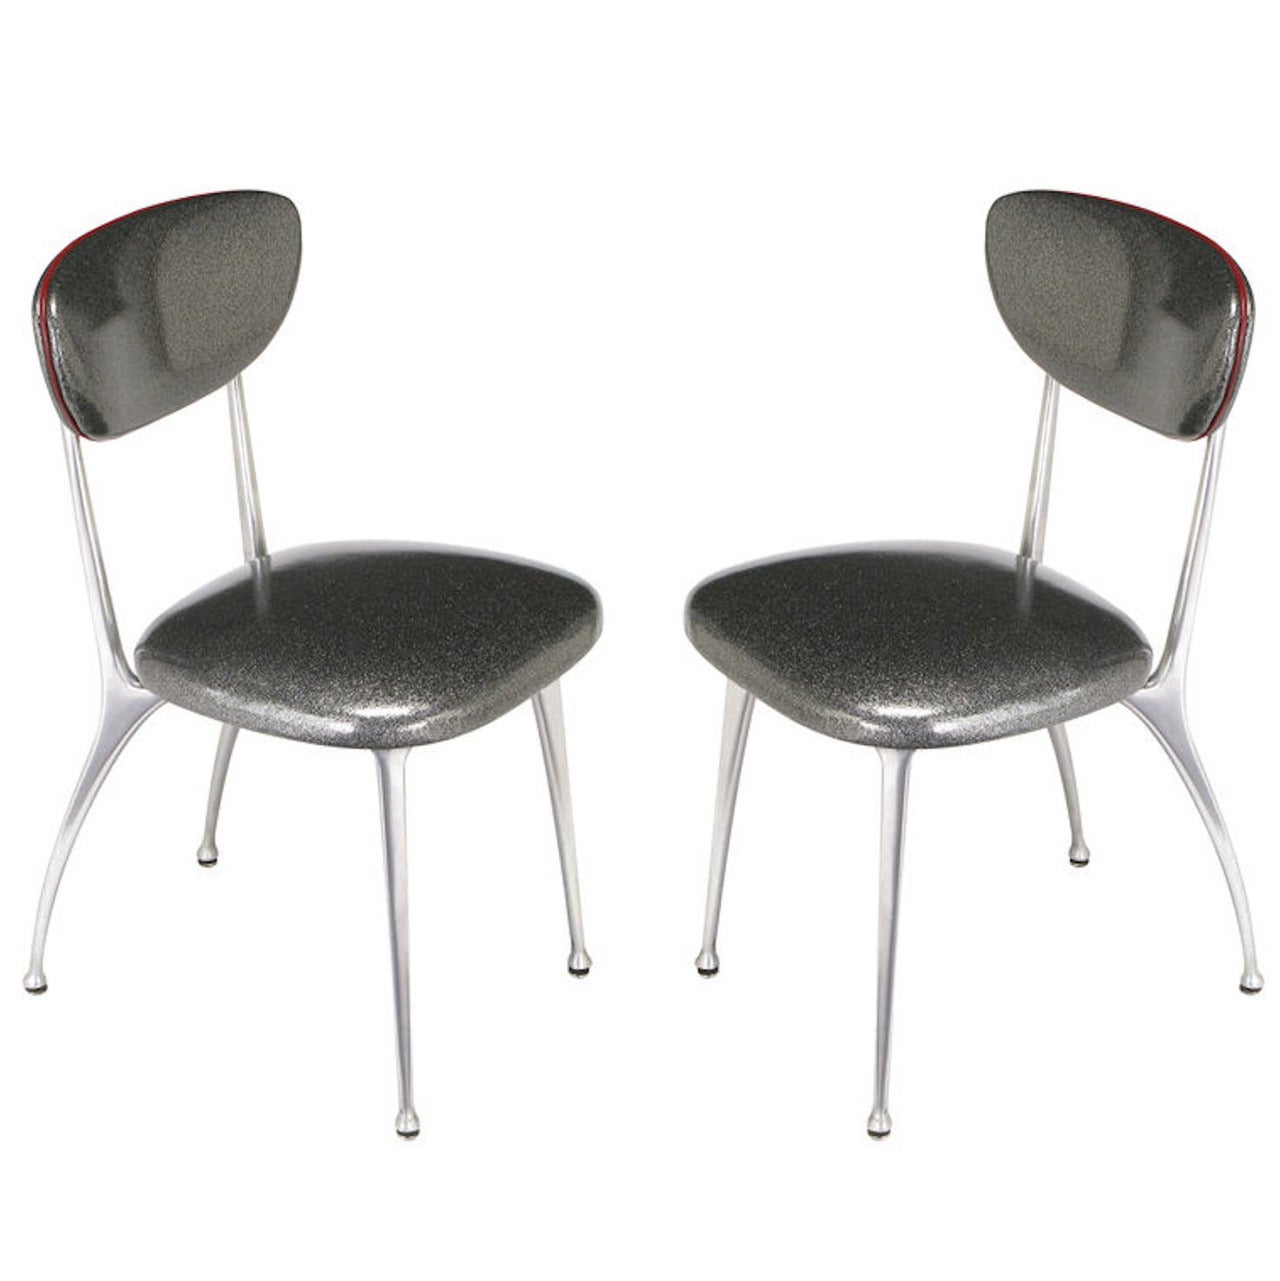 Pair of 1950s Shelby Williams Polished Aluminum Gazelle Side Chairs